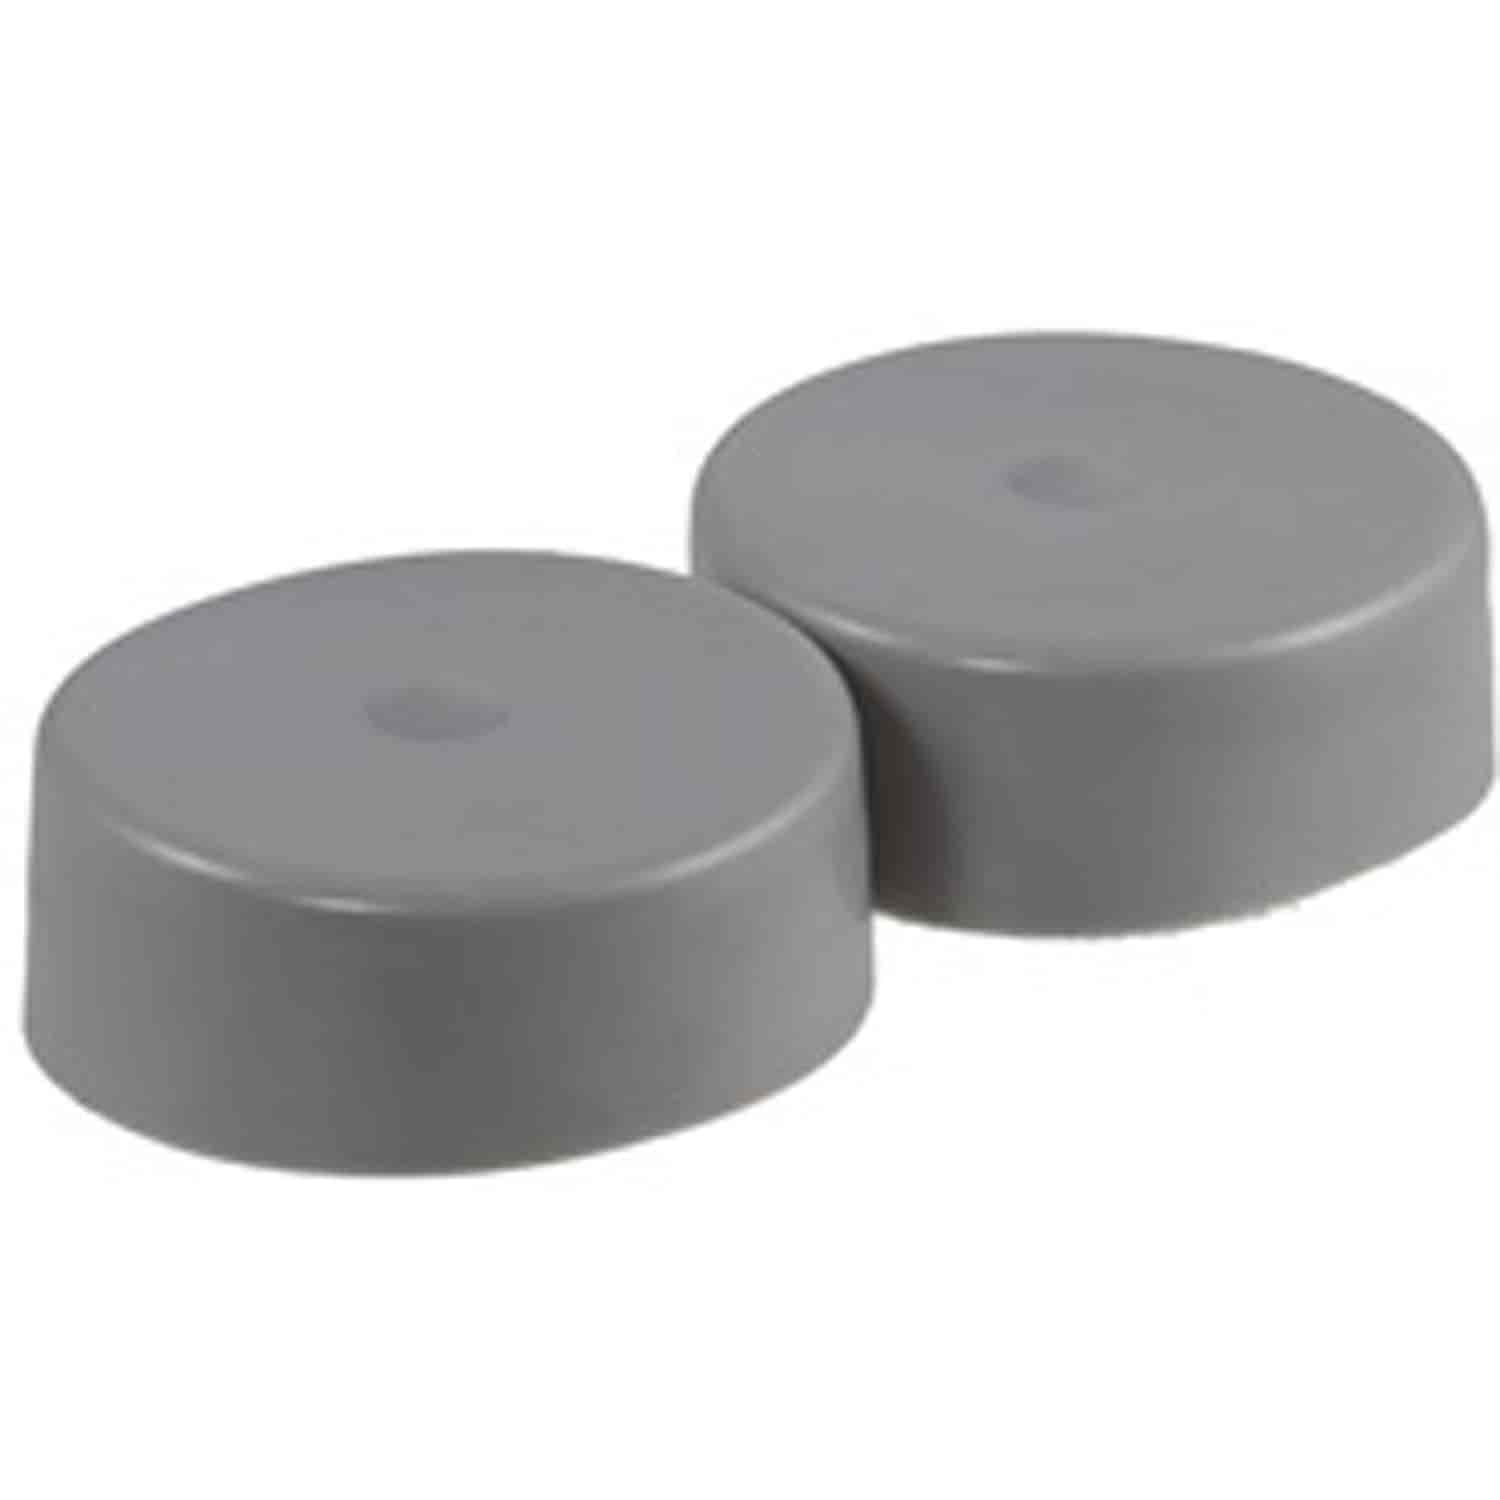 REPLACEMENT RUBBER COVERS FOR 2.44 DIAMETER BALL BEARING PROTECTORS